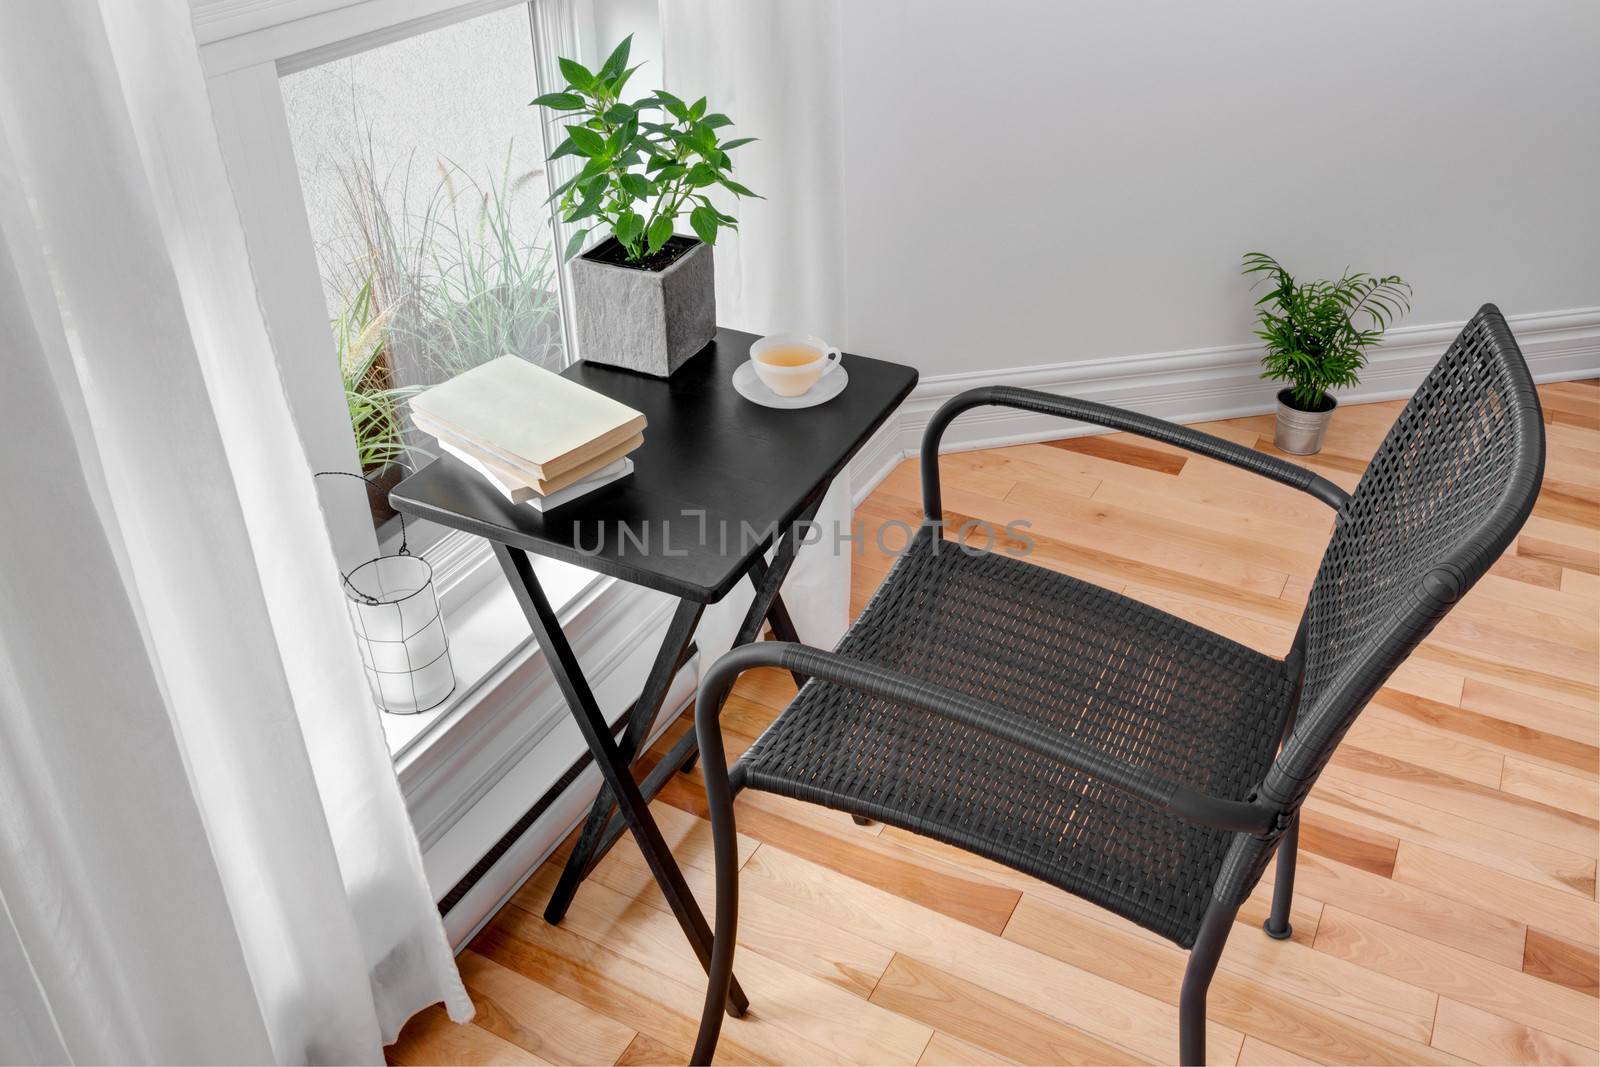 Black chair and table in a bright room with green plants.